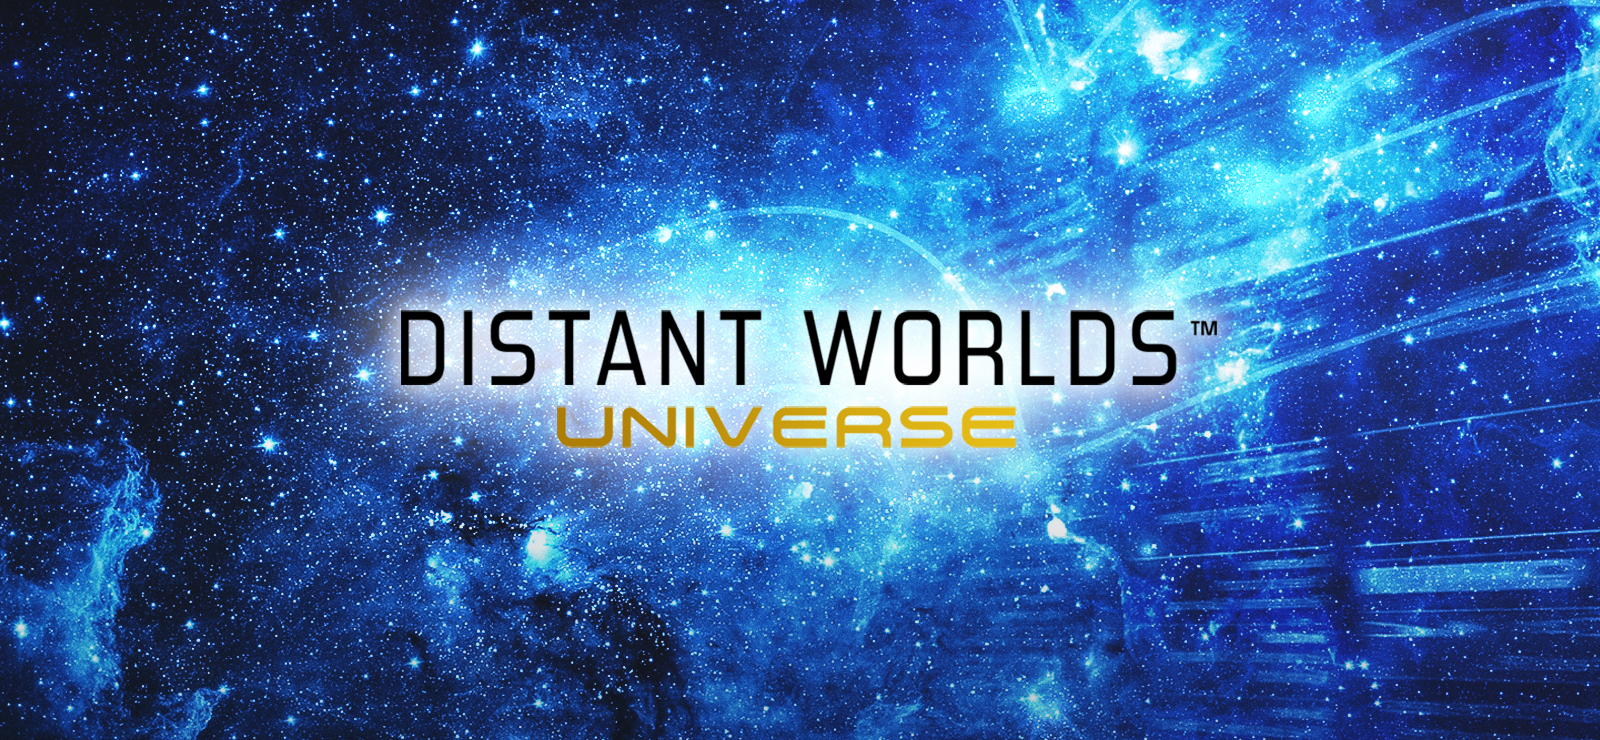 Distant Worlds: Universe